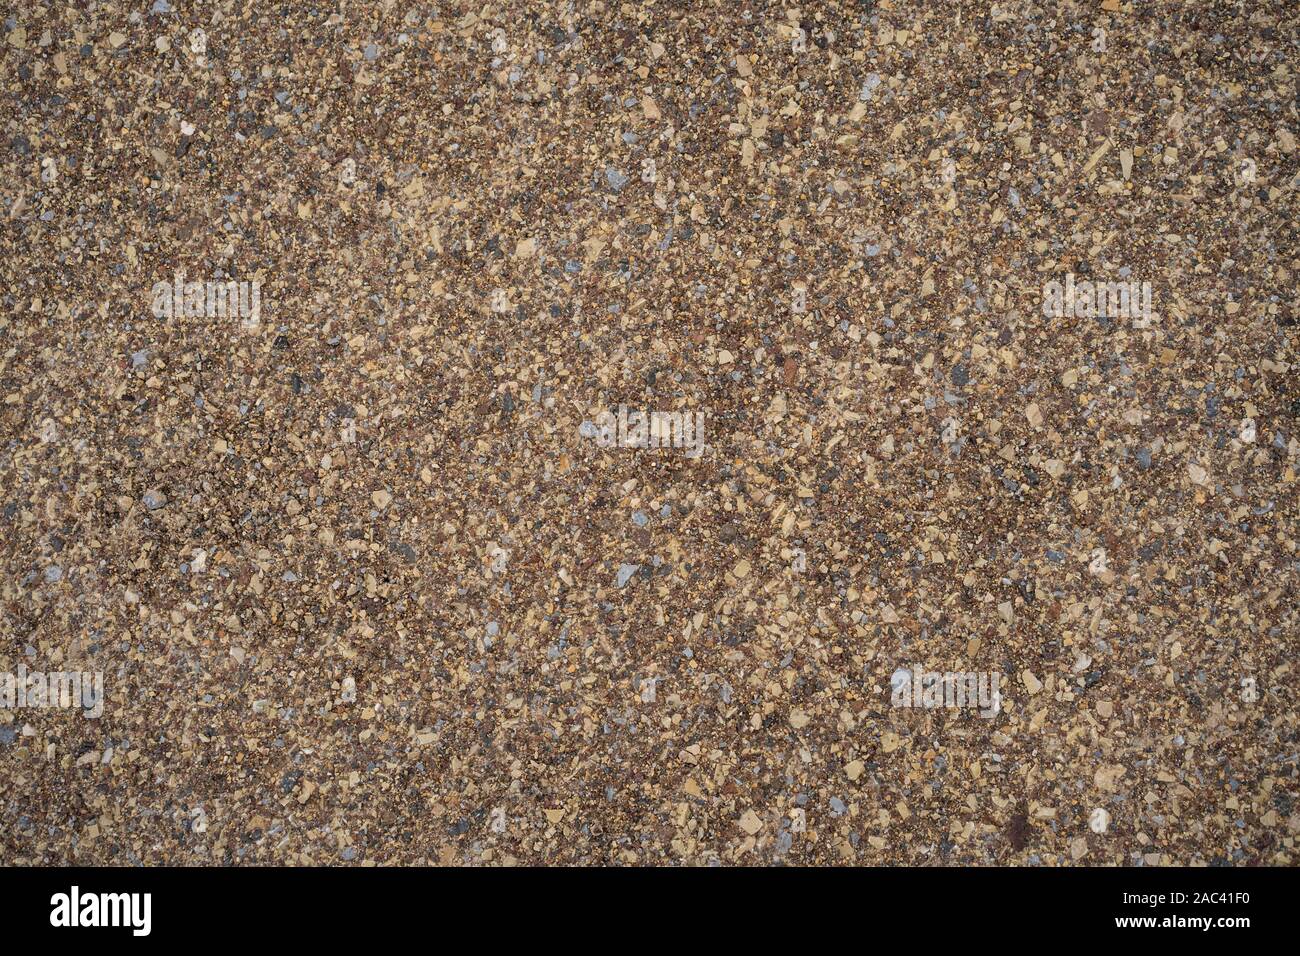 Fine gravel filling layer on a path Stock Photo